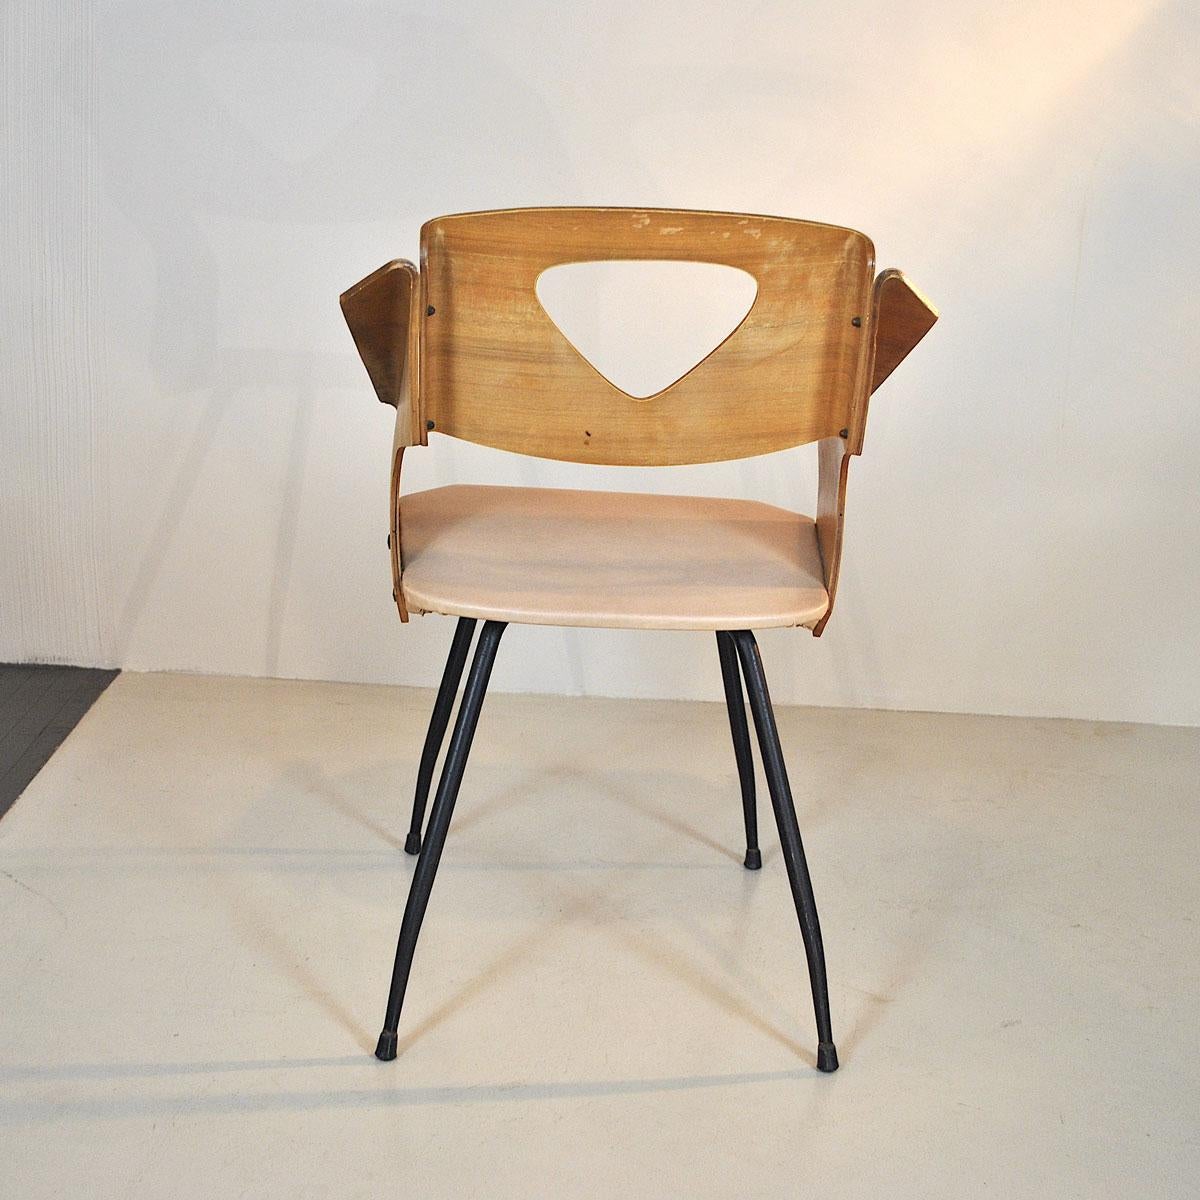 Carlo Ratti Italian Midcentury Chair in Curved Wood For Sale 3